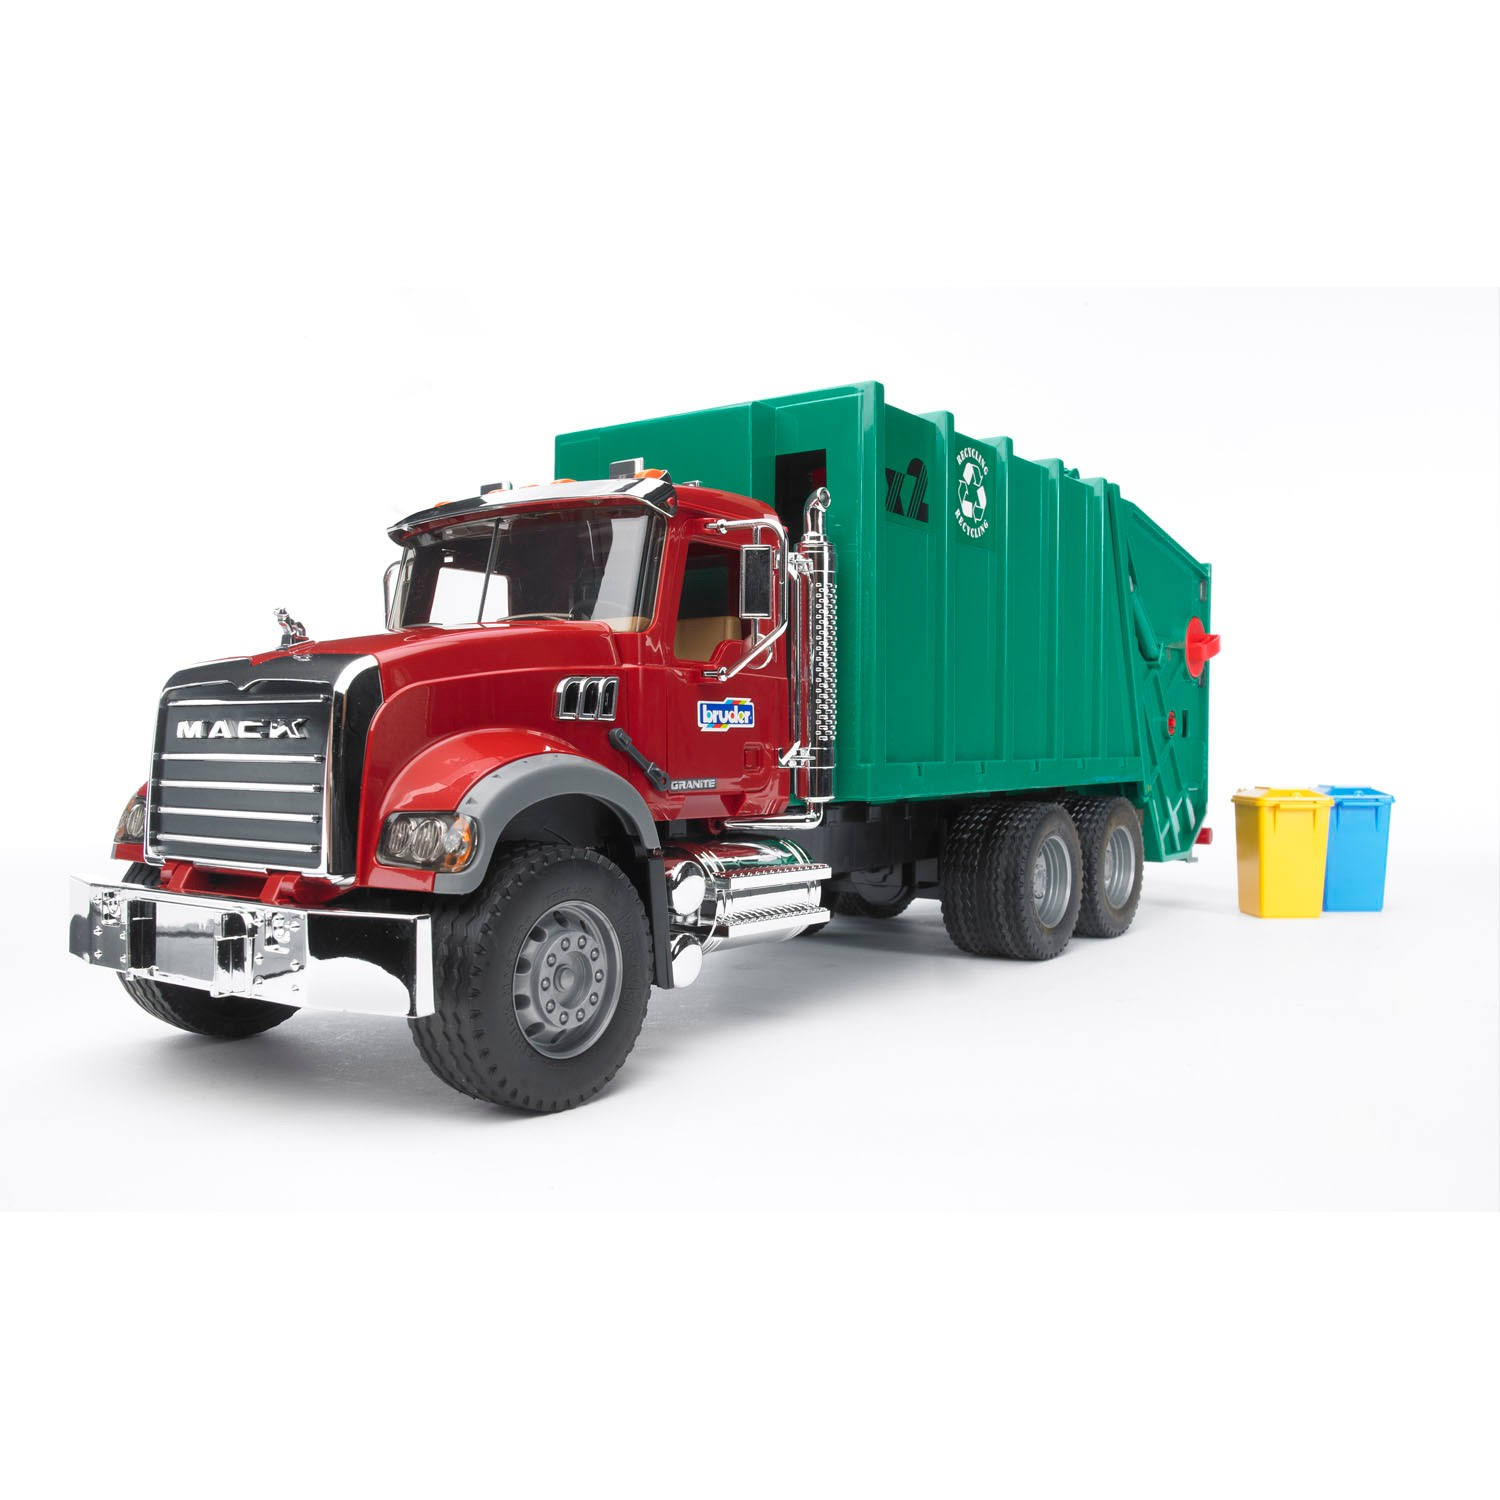 Bruder Toys Mack Granite Garbage Truck - Ruby Red and Green